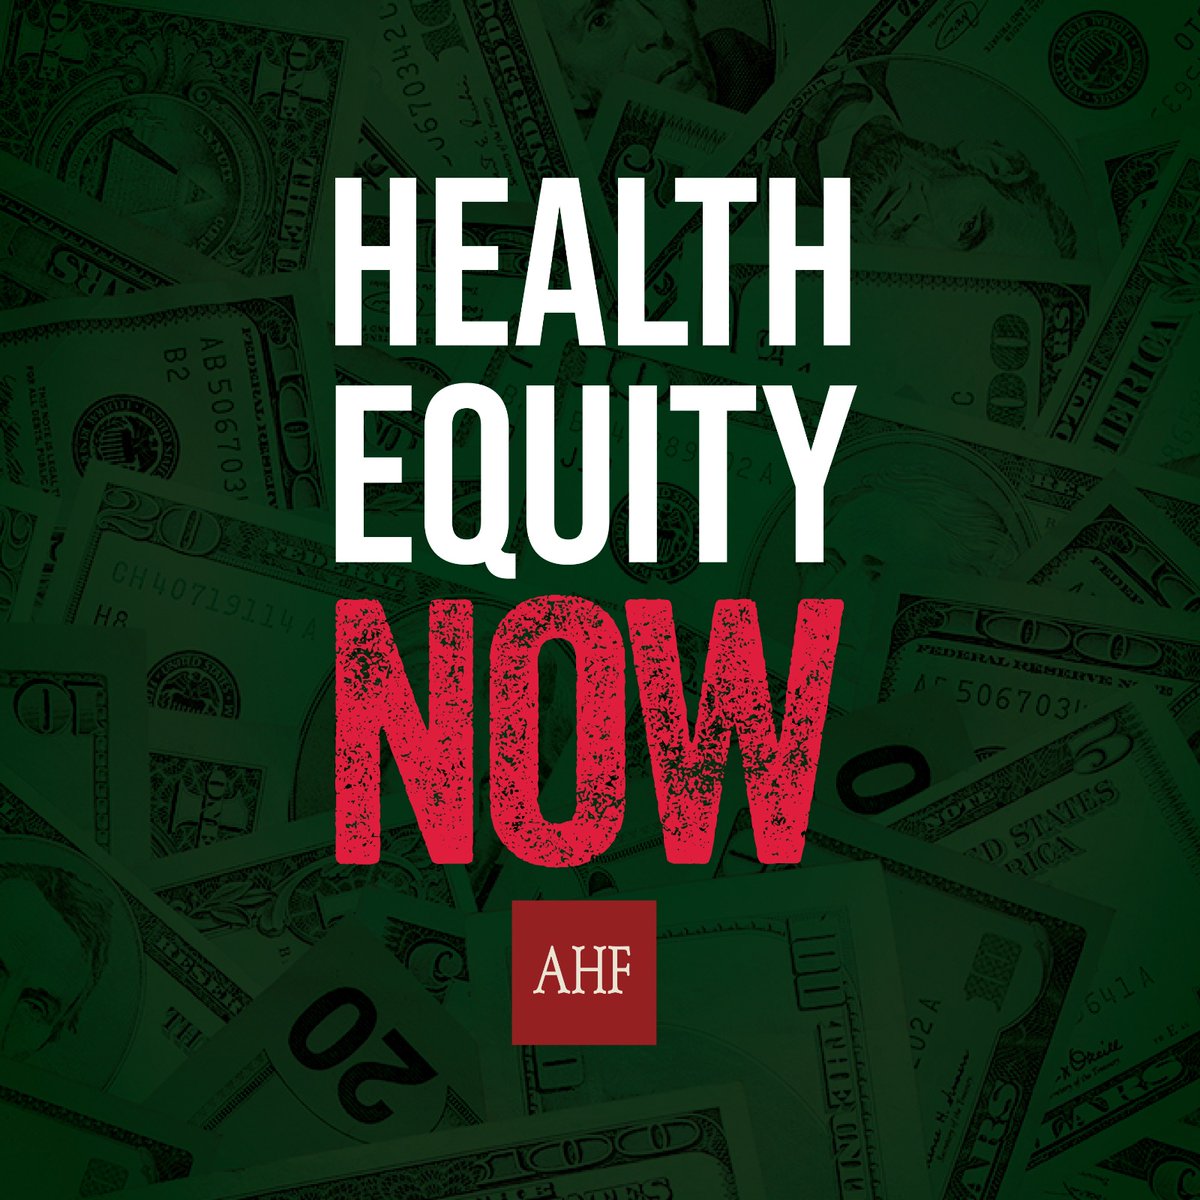 While the world discusses the final pandemic agreement, let's heed the vital issues flagged by @ahfkenya and @AYARHEP_KENYA. Upholding equity, accountability and involving civil society are pivotal steps forward. #HealthEquityNow #StopPharmaGreed @WHOKenya @WHO @AIDSHealthcare